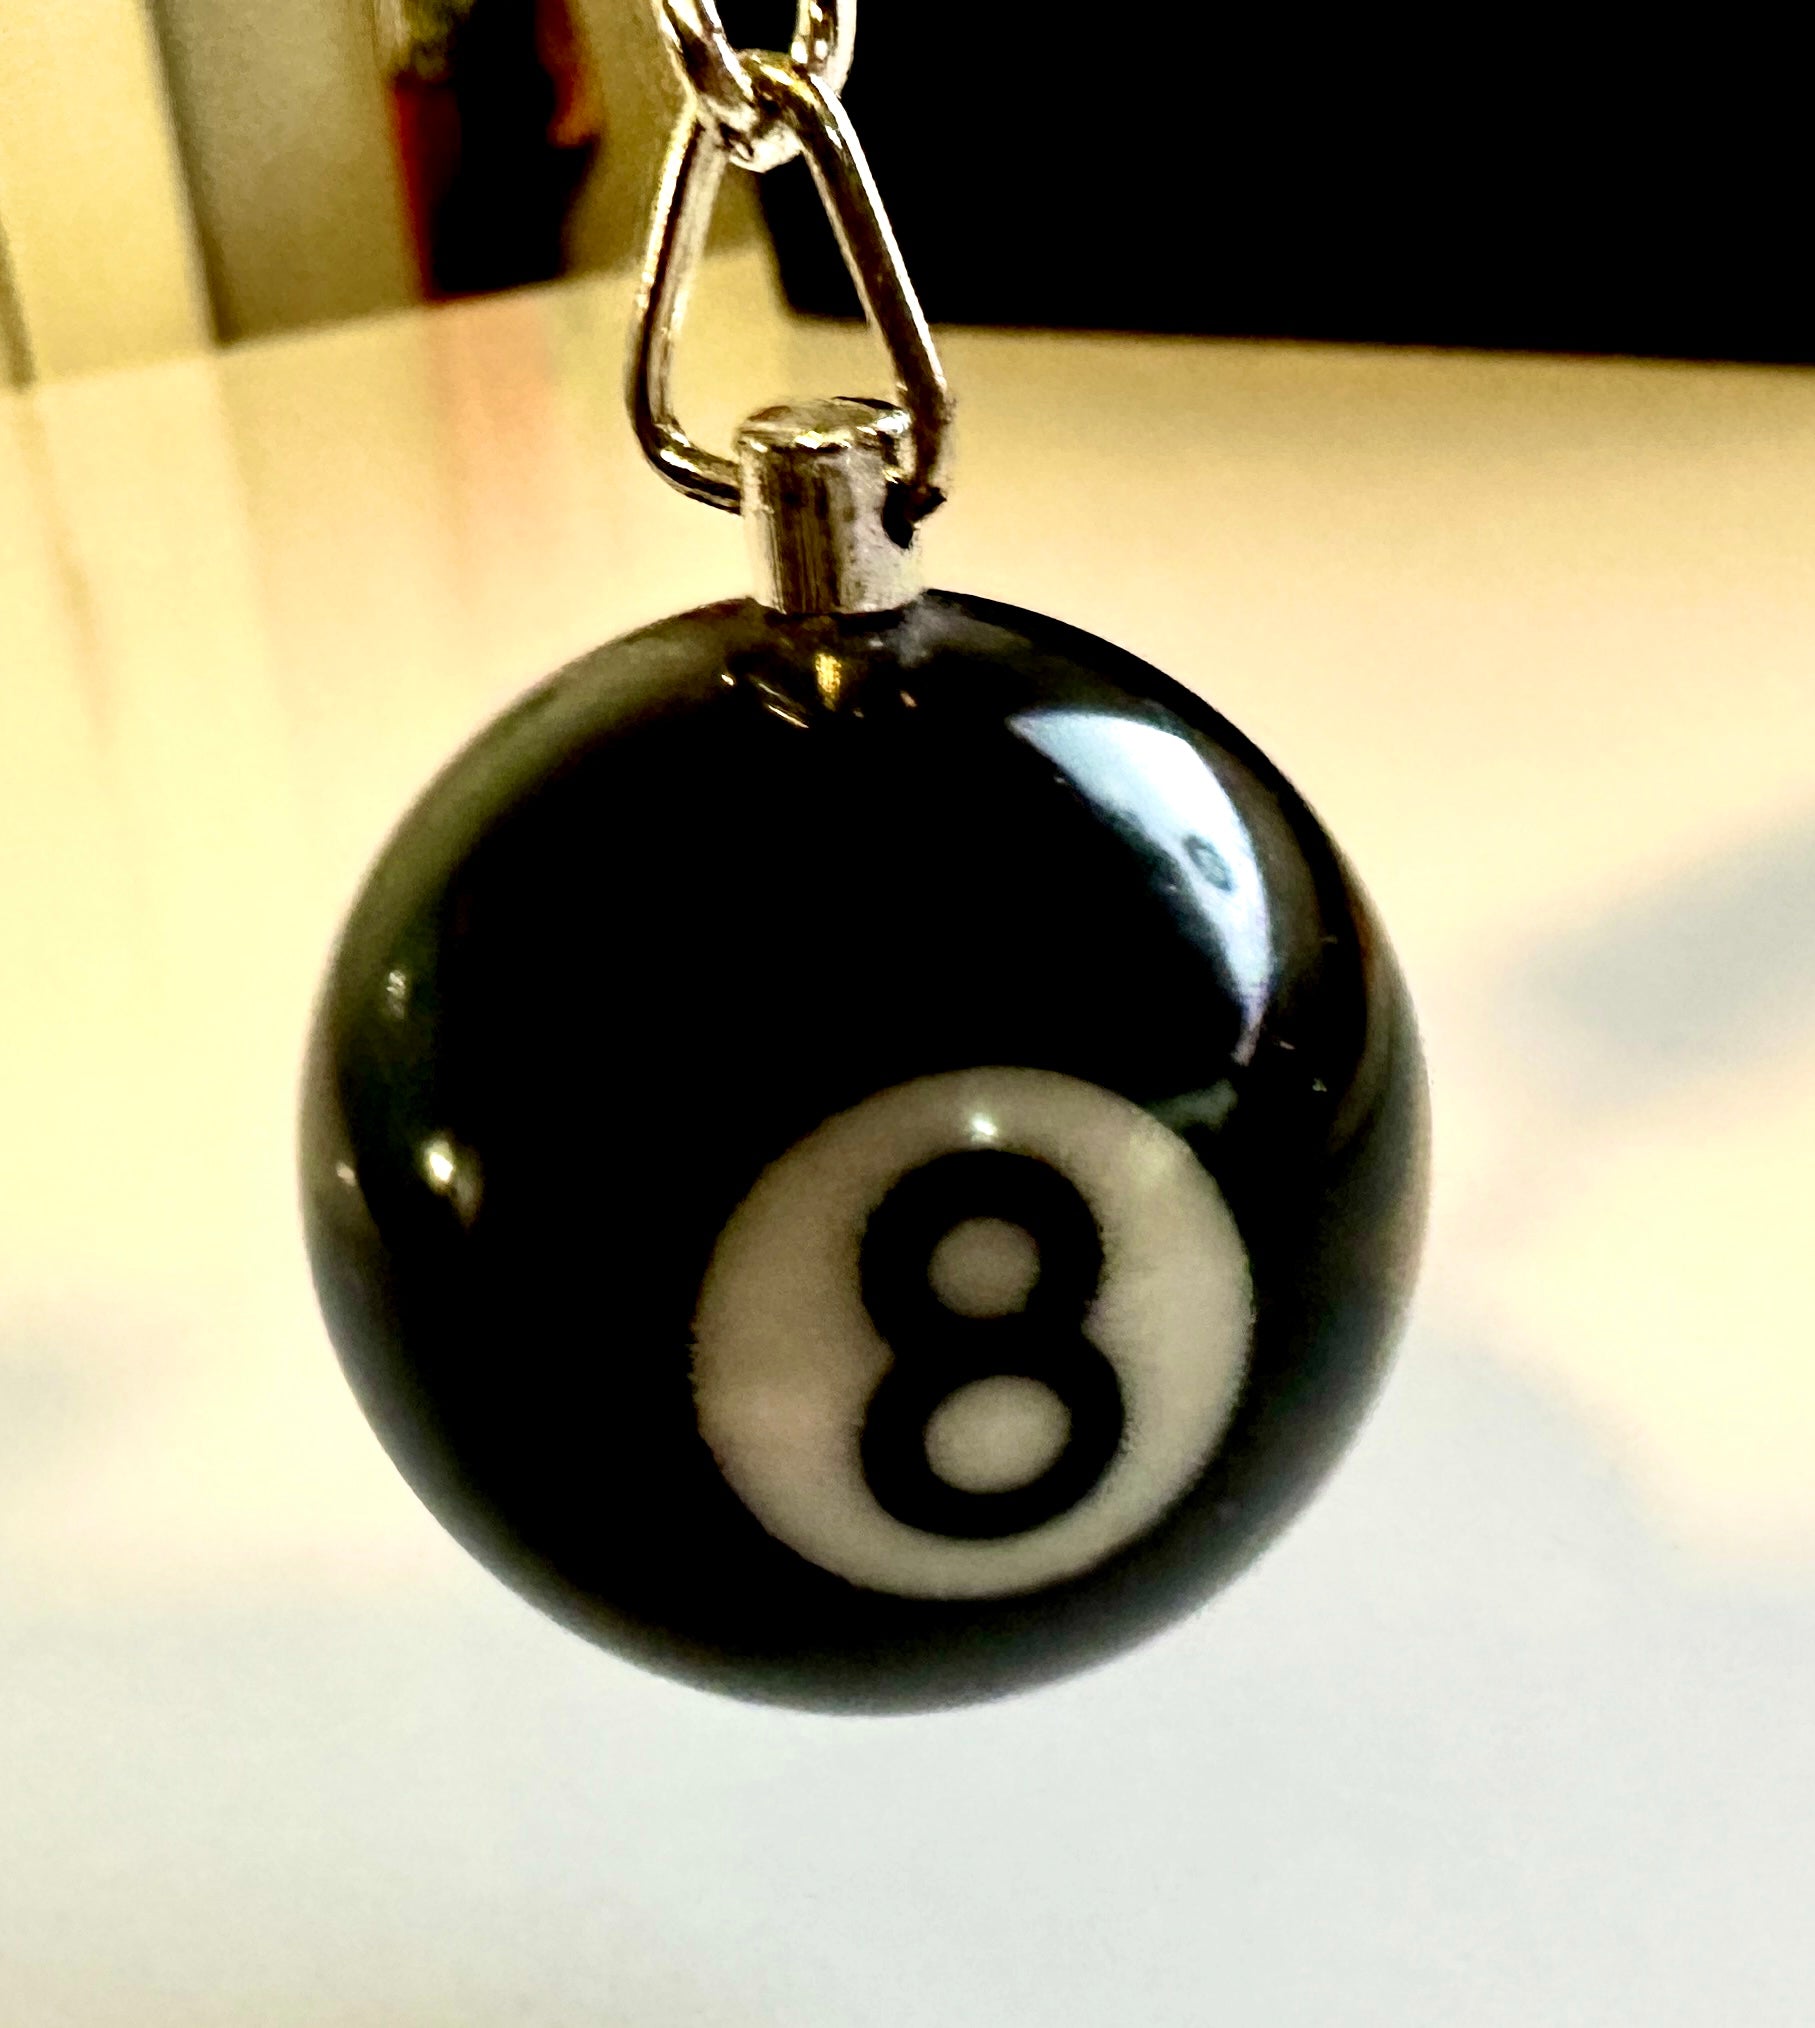 Shop for and Buy Billiard Ball Keychain at . Large